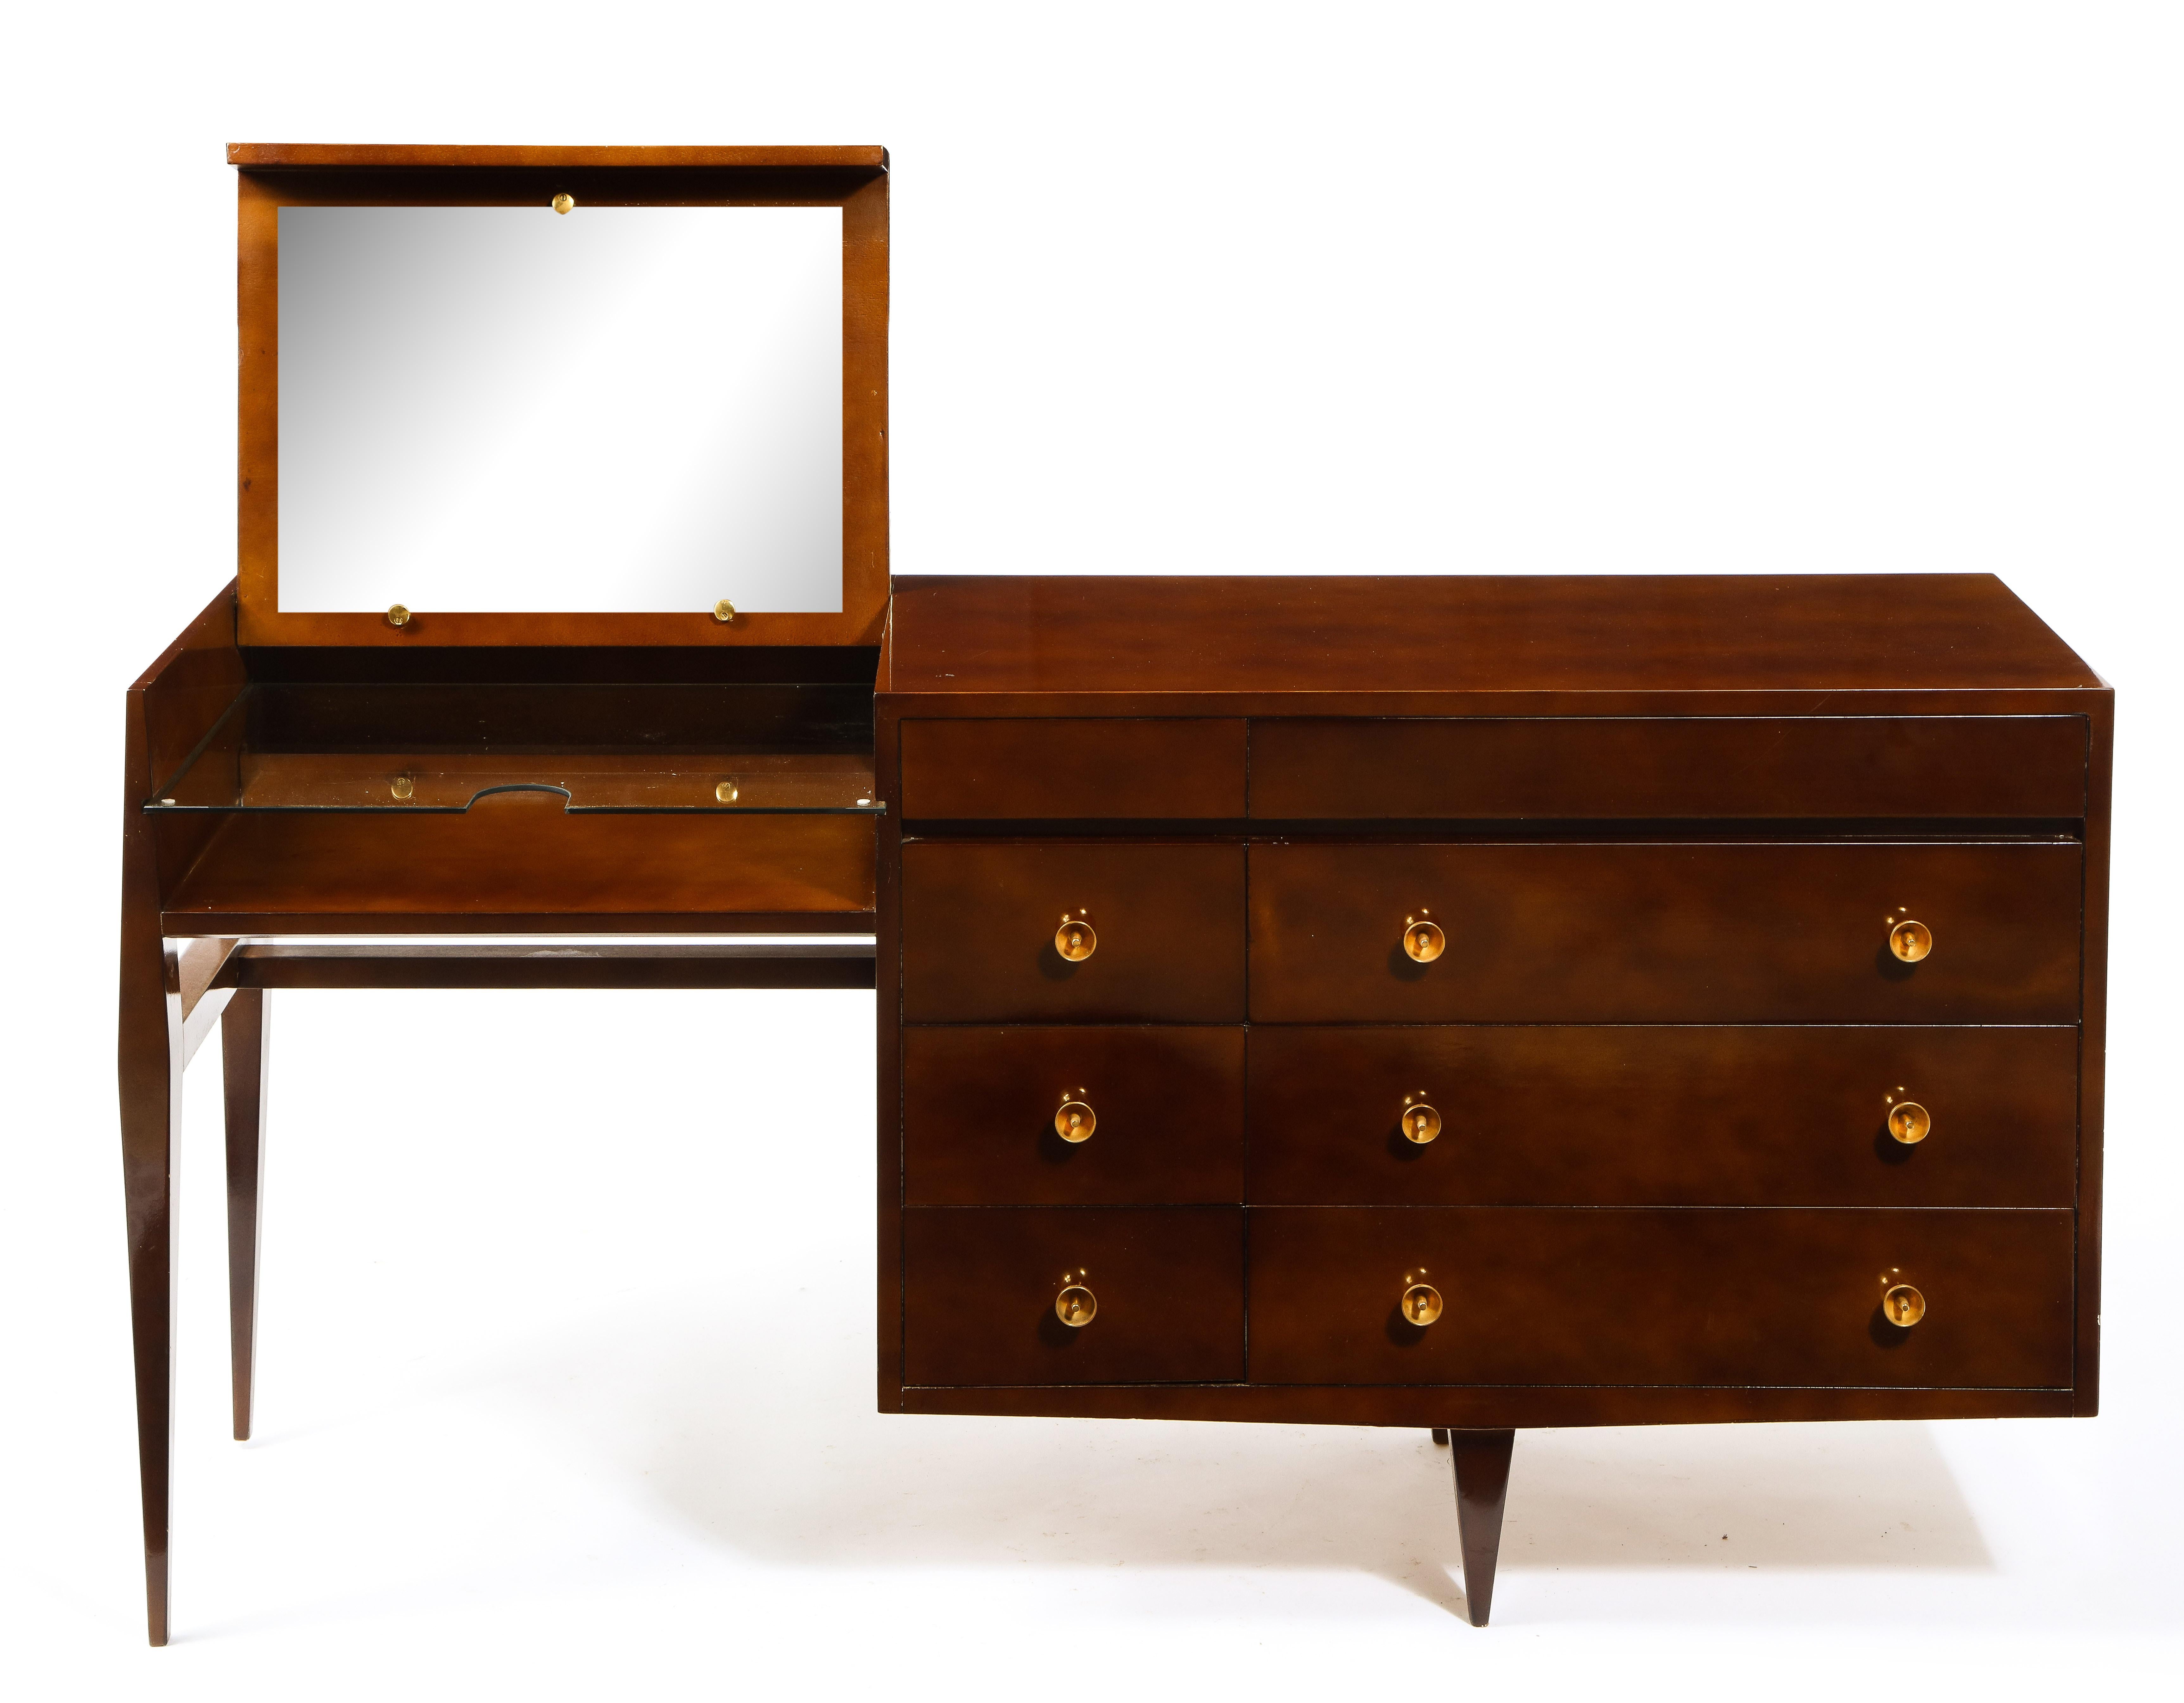 Elegant vanity by Raphael. A concealed mirror, and an abundance of drawers make this piece a convenient item. Original gilt bronze hardware and lacquer. Signed on a plate inside a drawer.